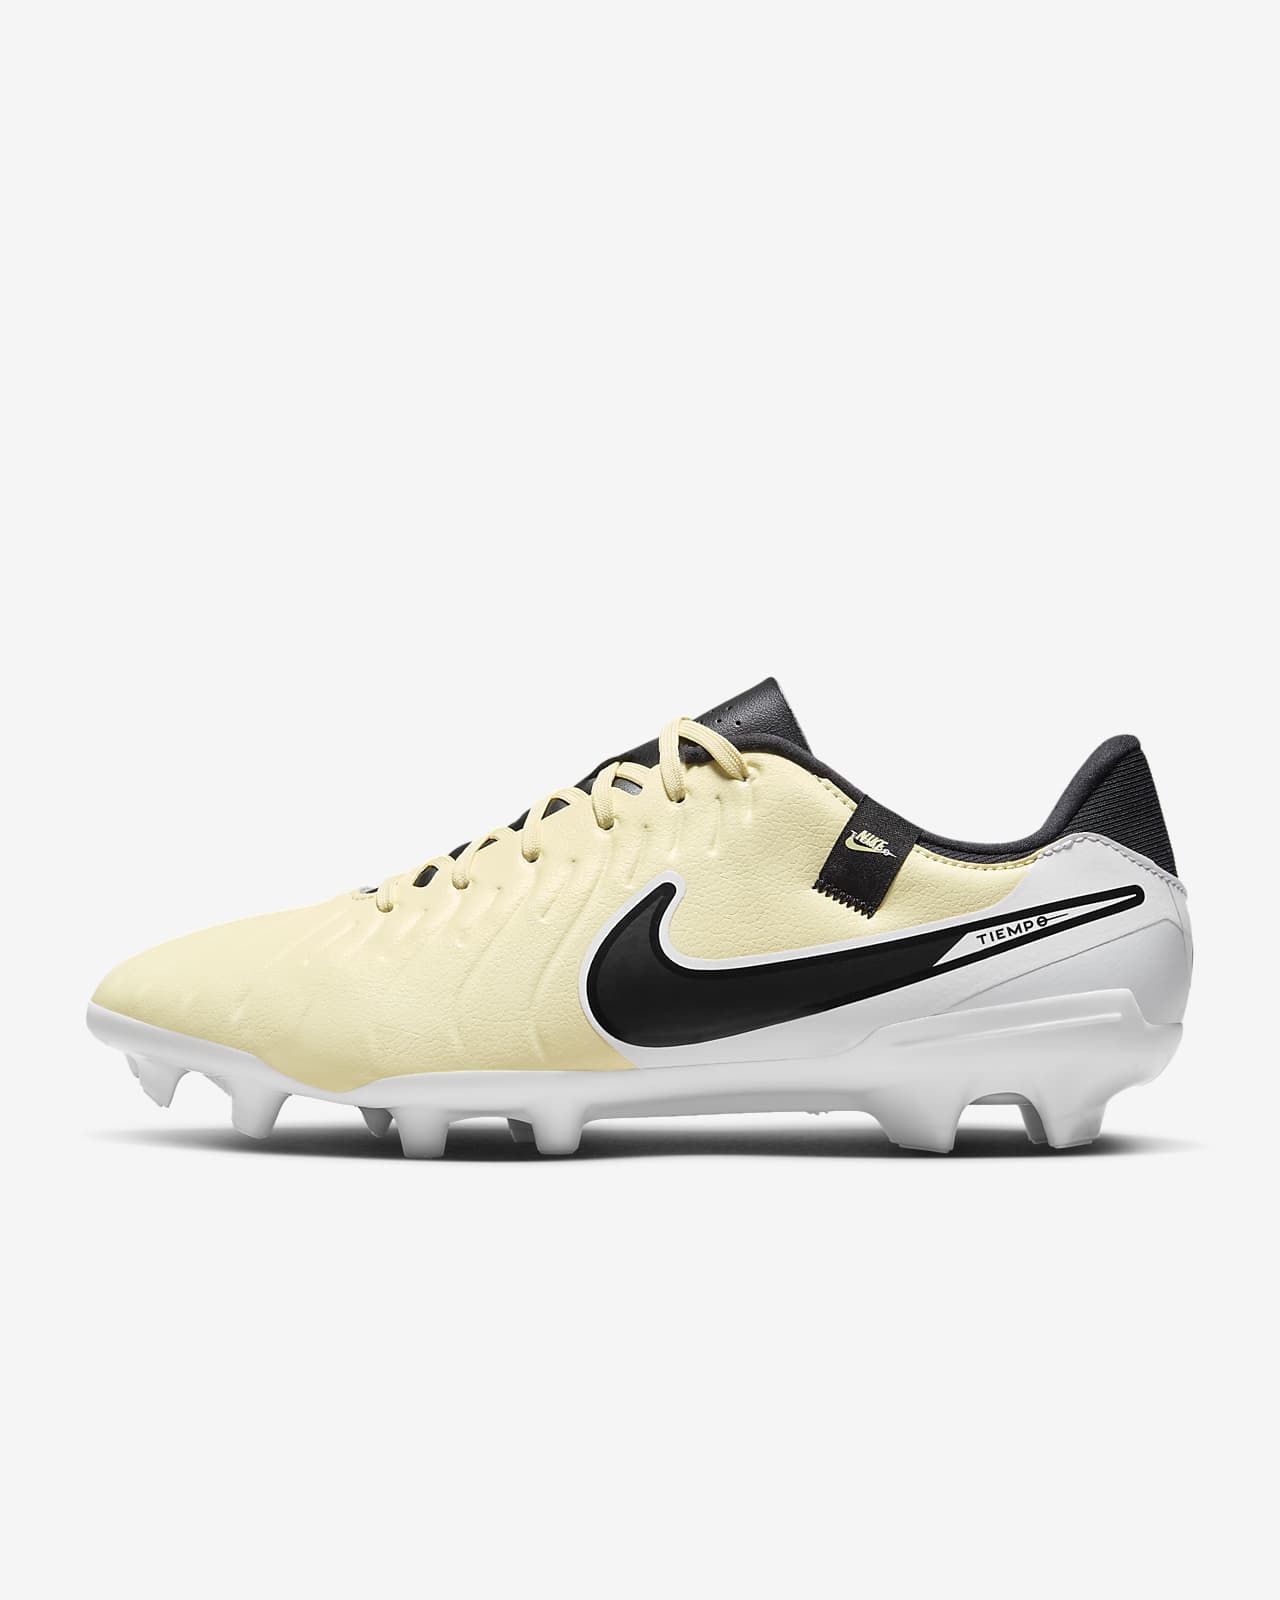 Nike Tiempo Legend 10 Academy Multi-Ground Low-Top Football Boot